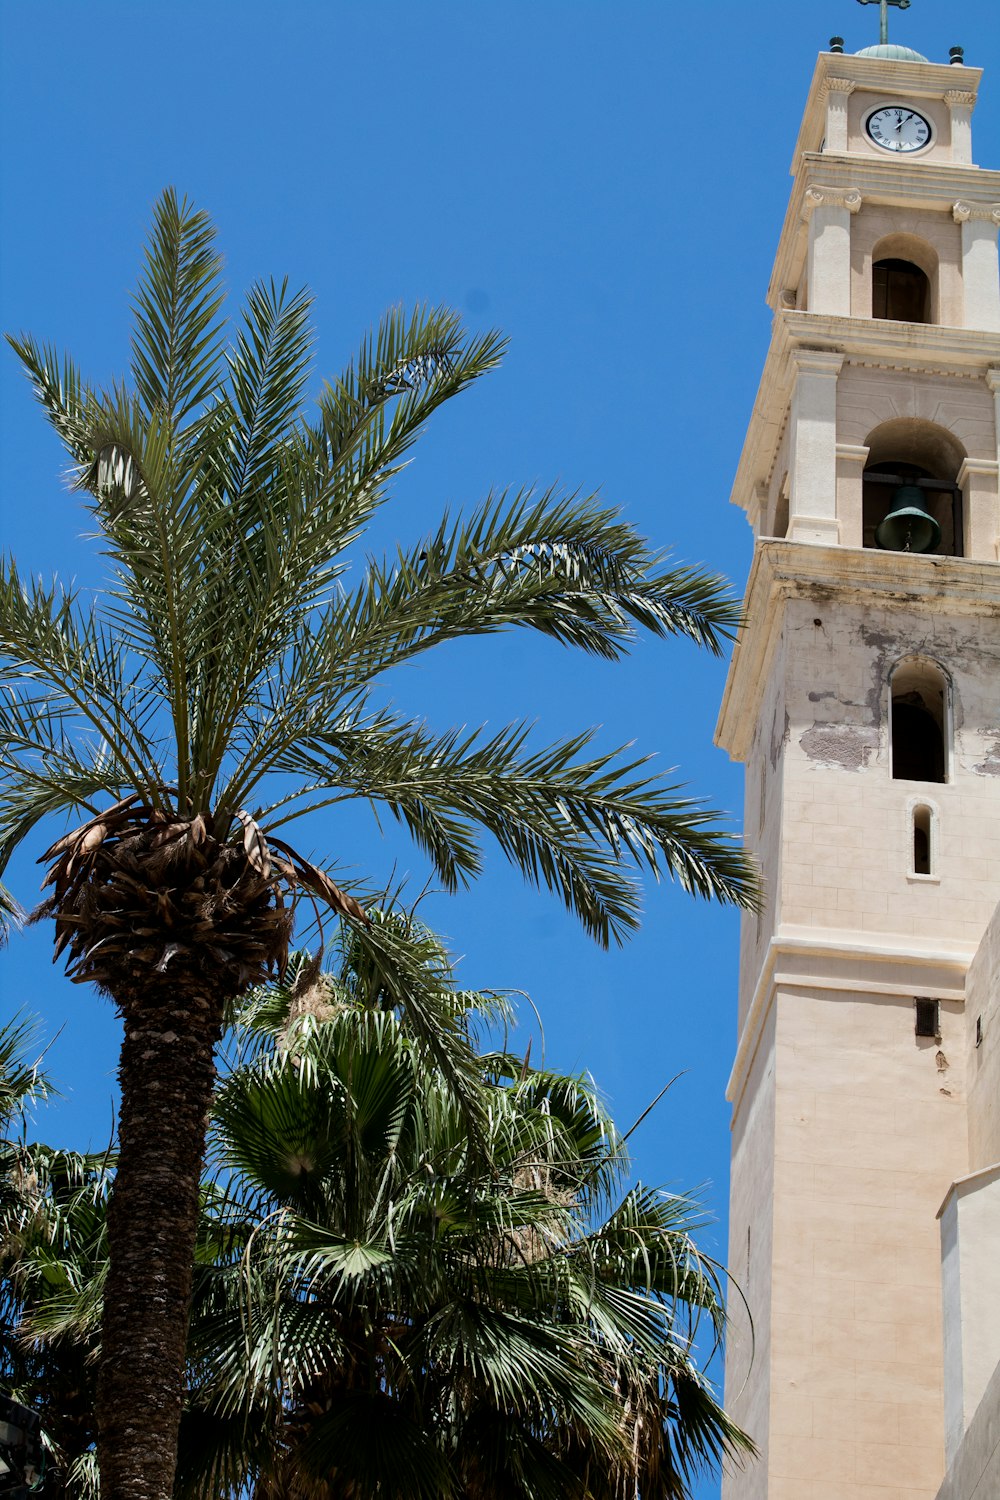 a tall tower with a clock on it next to a palm tree